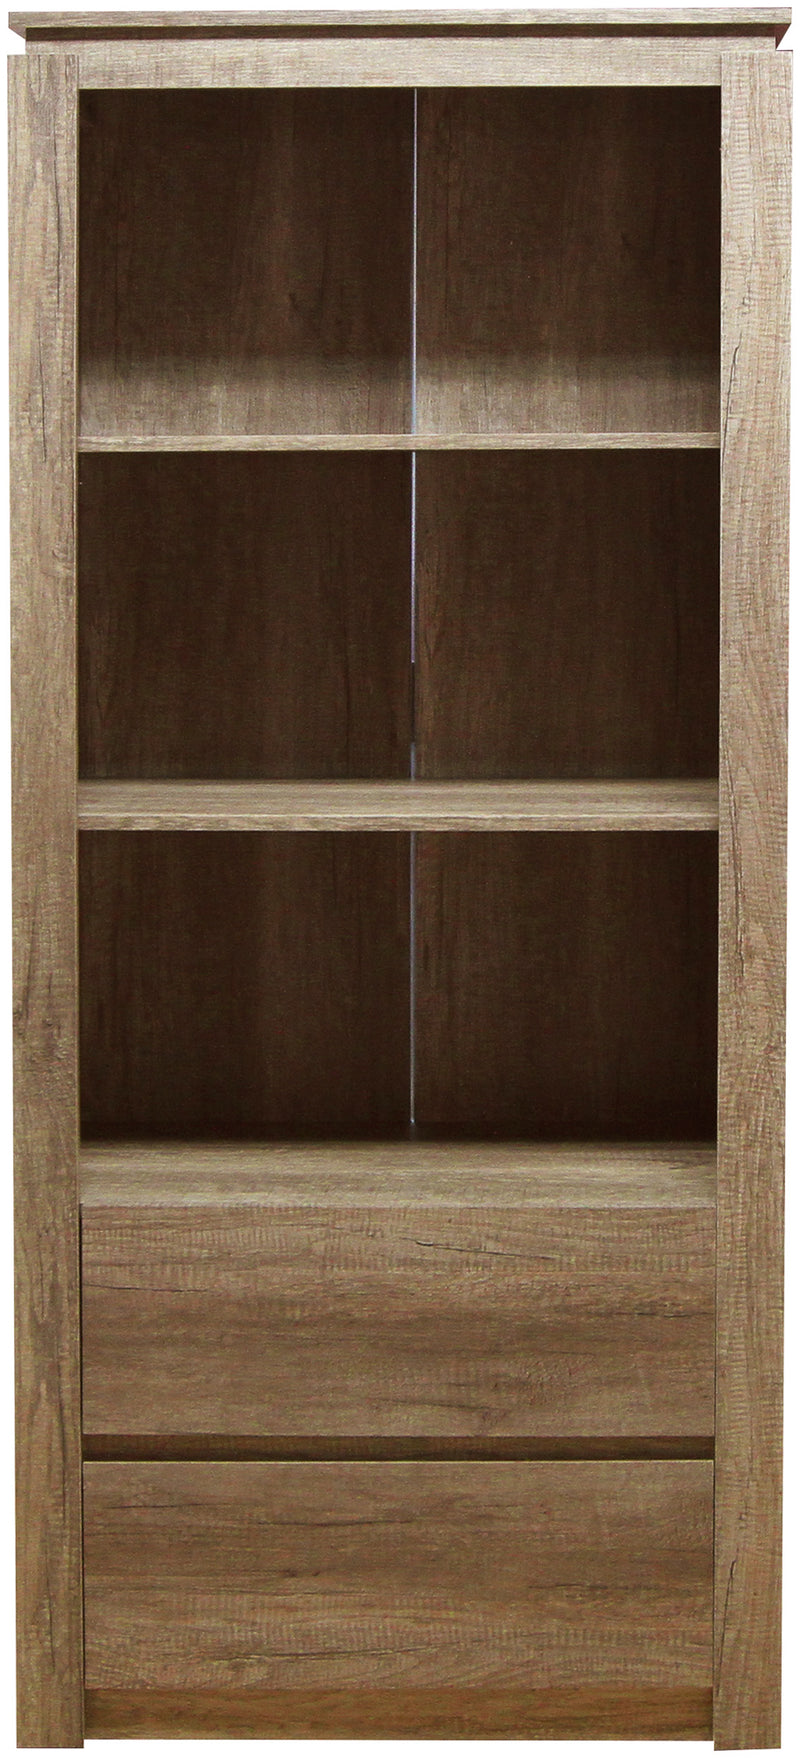 Textured Finish Bookcase With 3 Deep Shelves and 2 Bottom Drawers